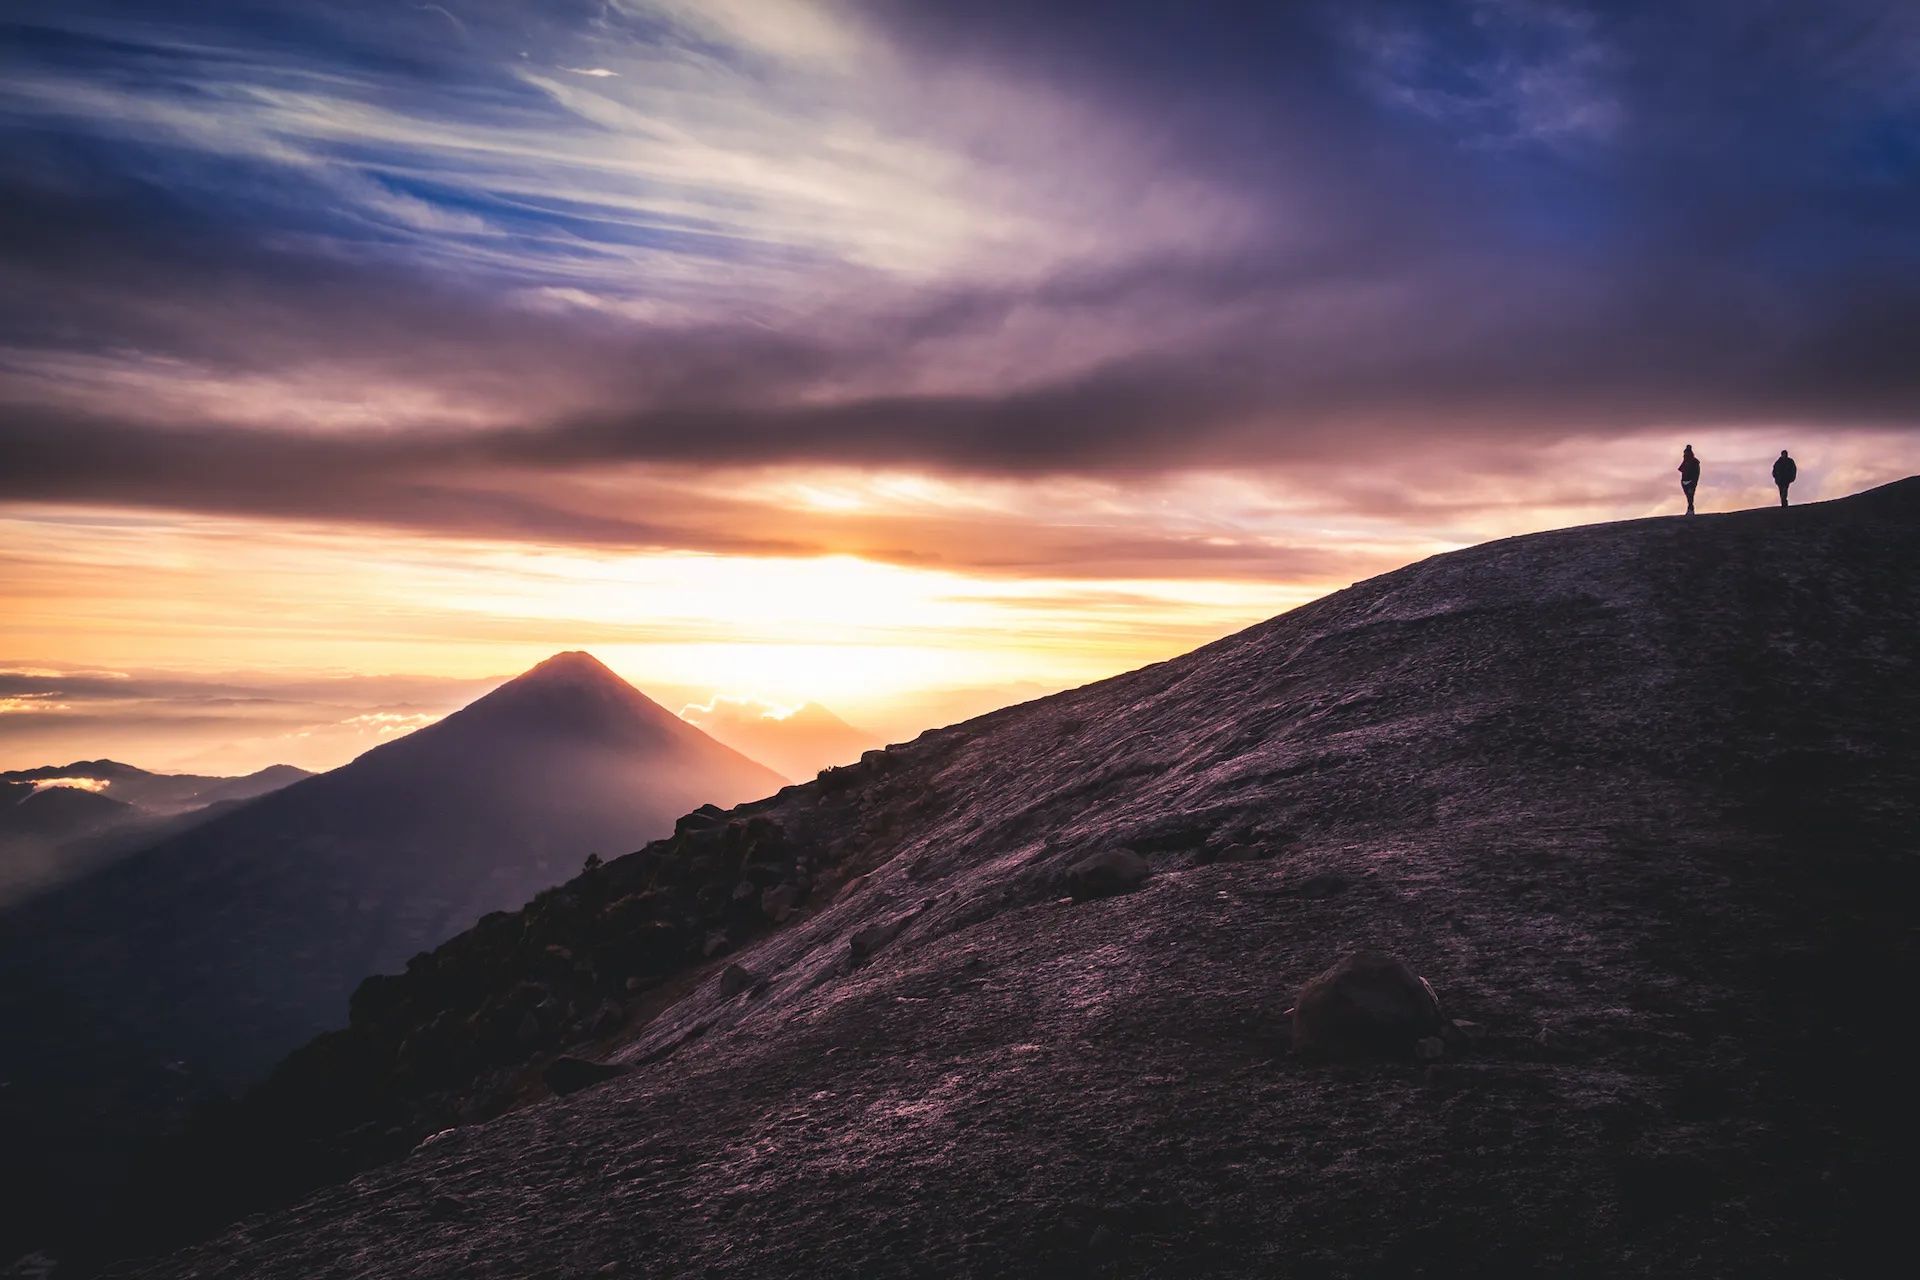 Hikers witness sunrise on top of Mount Acatenango, a volcano in Guatemala